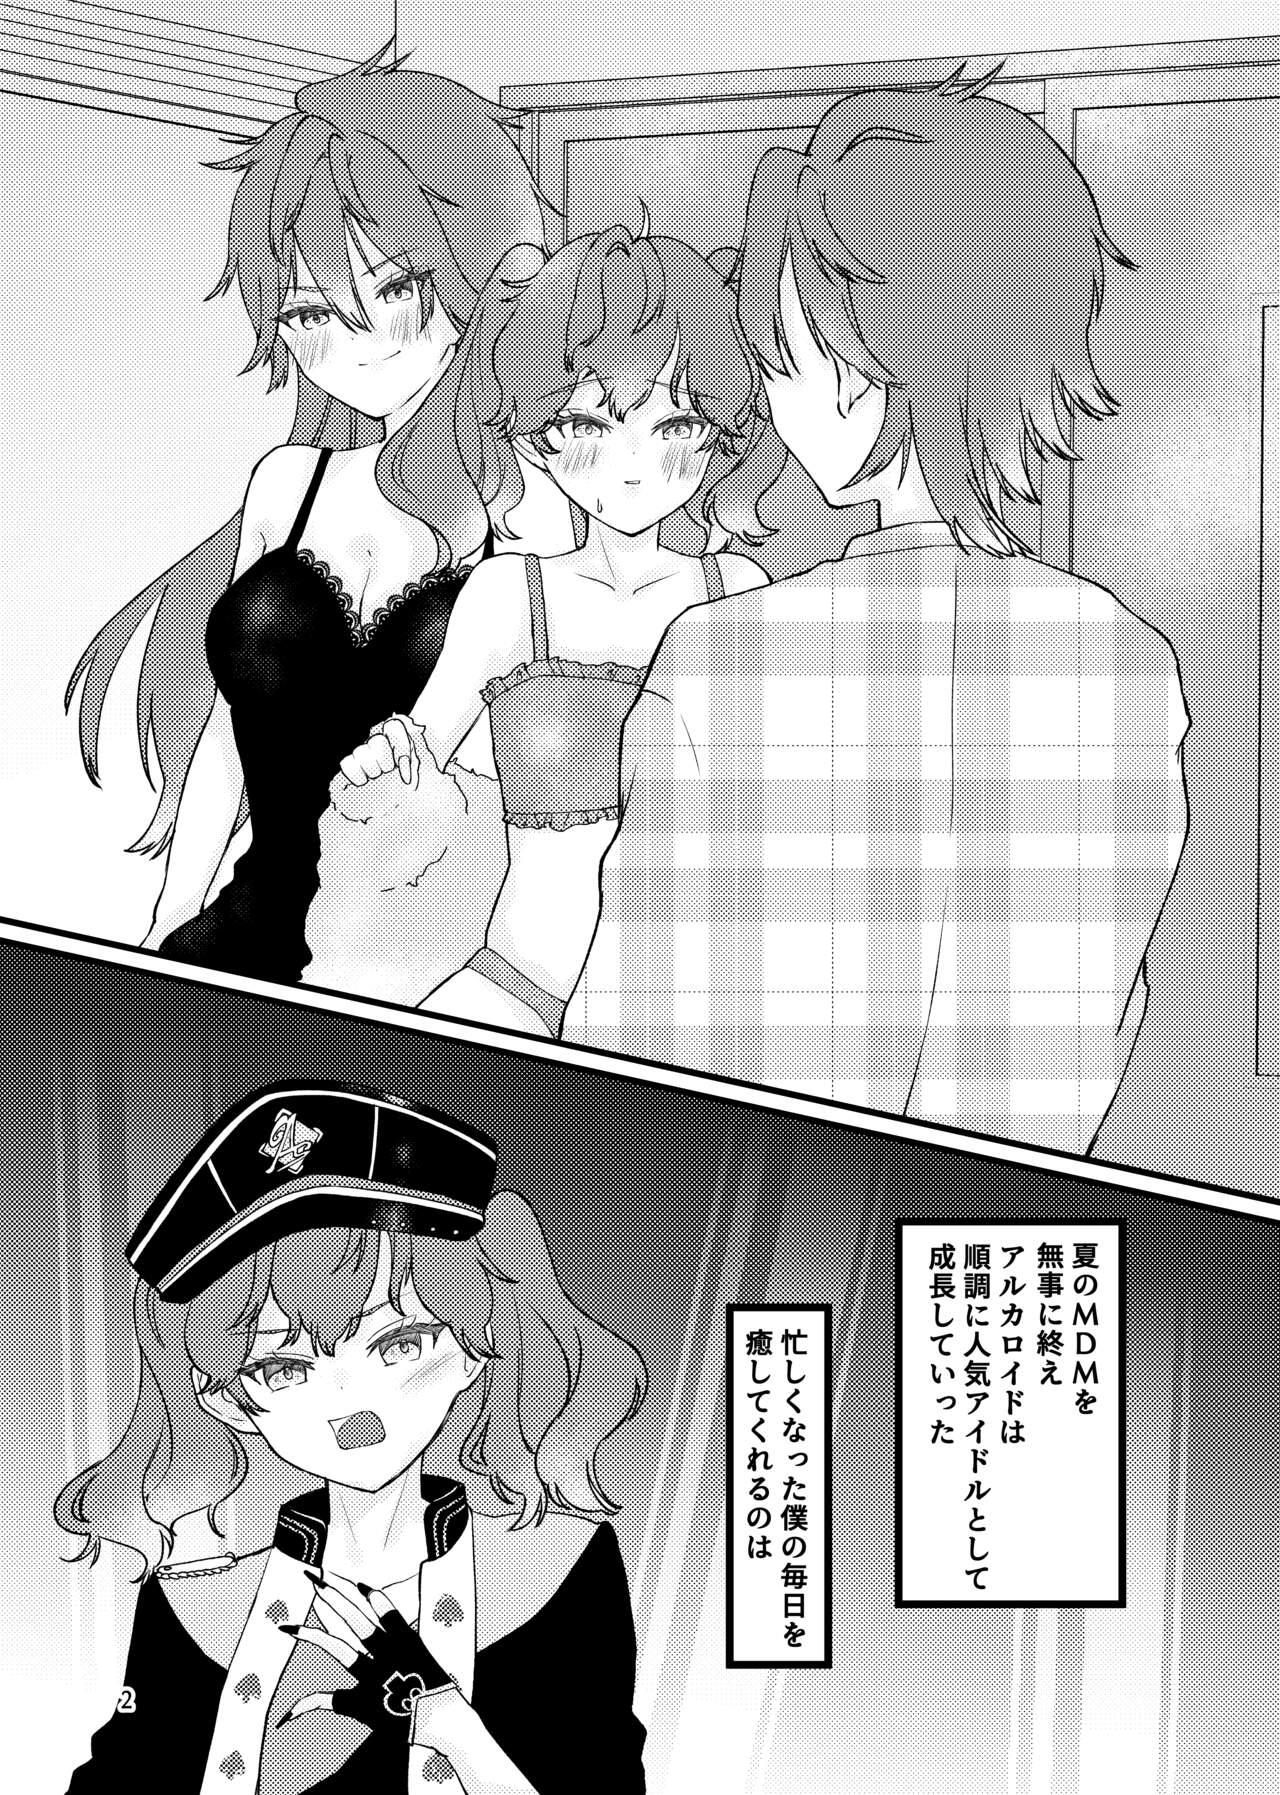 Fucked Hard 燐燐♀一♀ - Ensemble stars Eating Pussy - Page 3